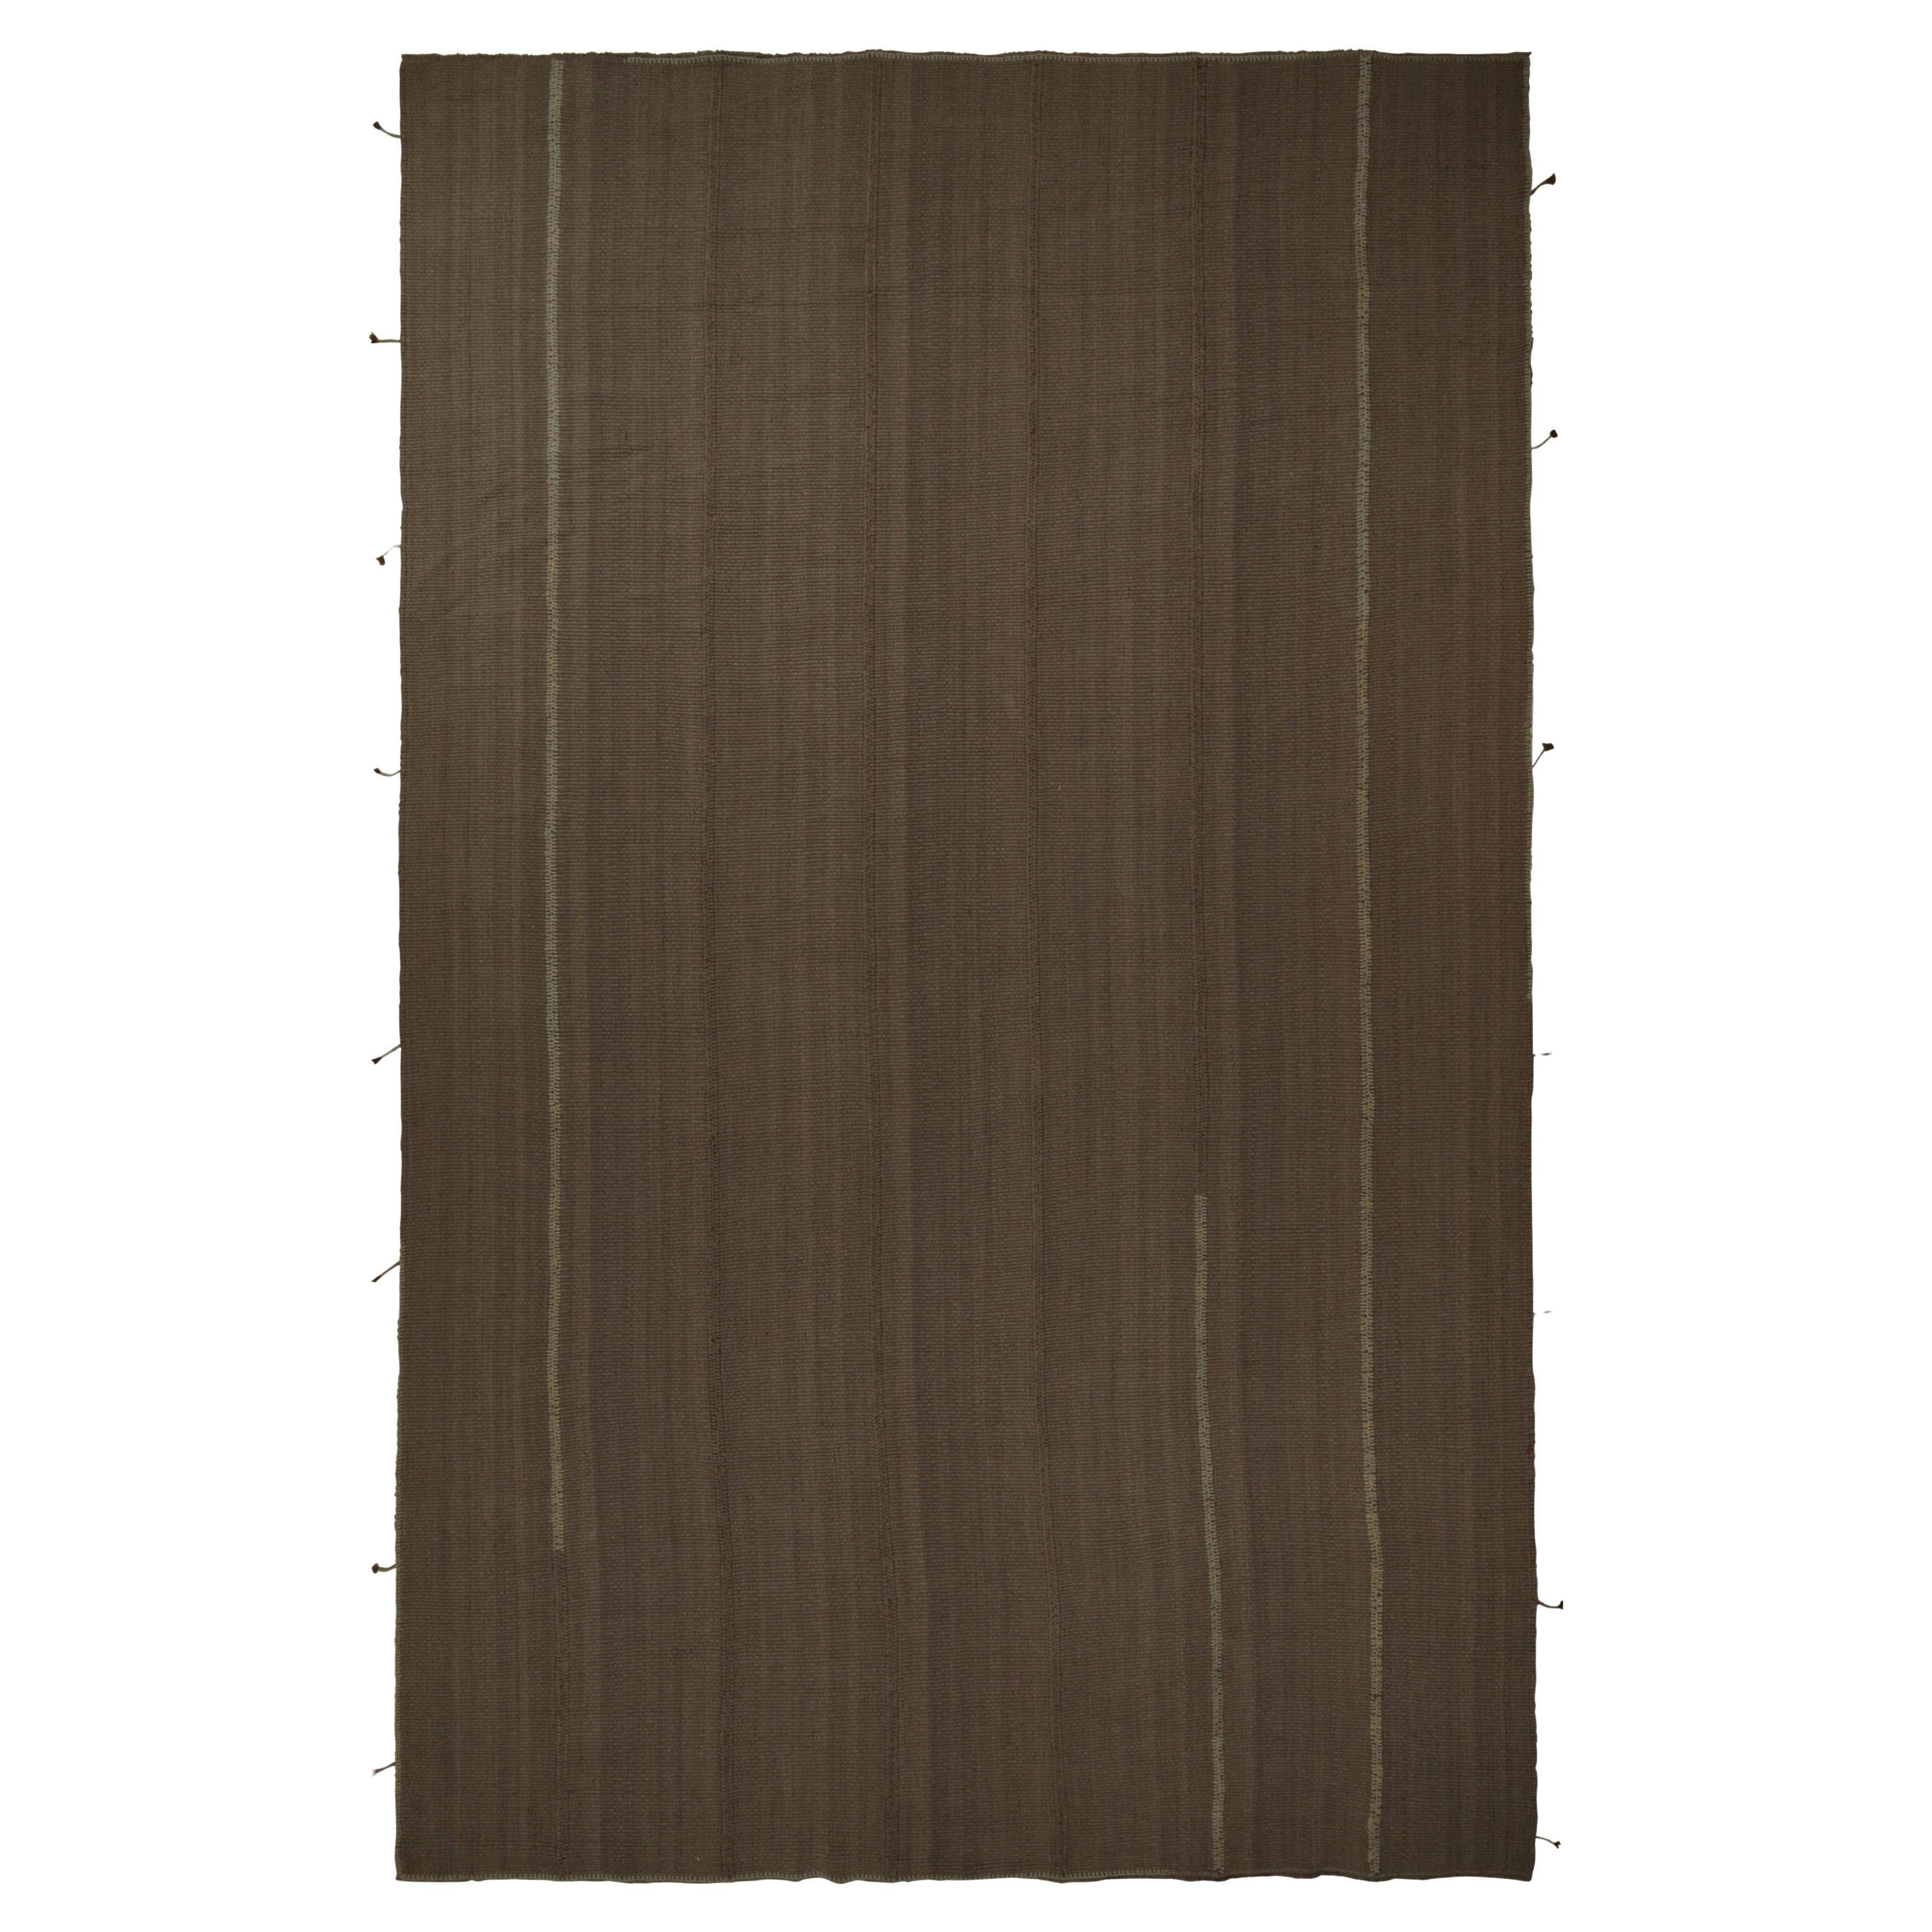 Rug & Kilim’s Contemporary Oversized Kilim in Brown with Muted Stripes